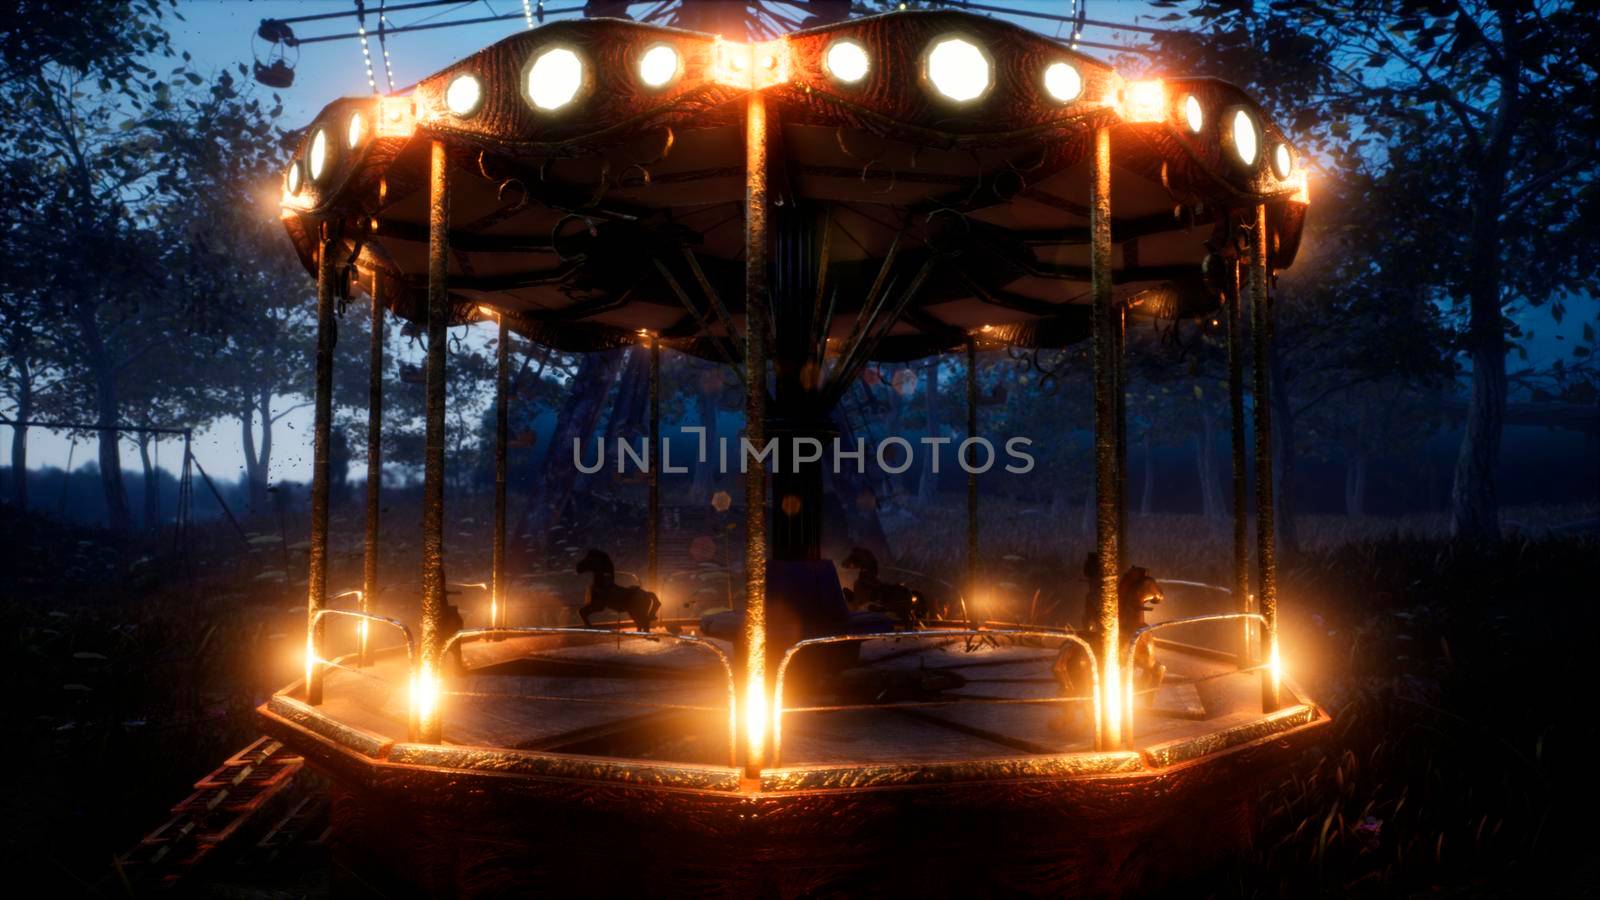 Abandoned Carousel and Ferris wheel in an amusement Park in an abandoned city.